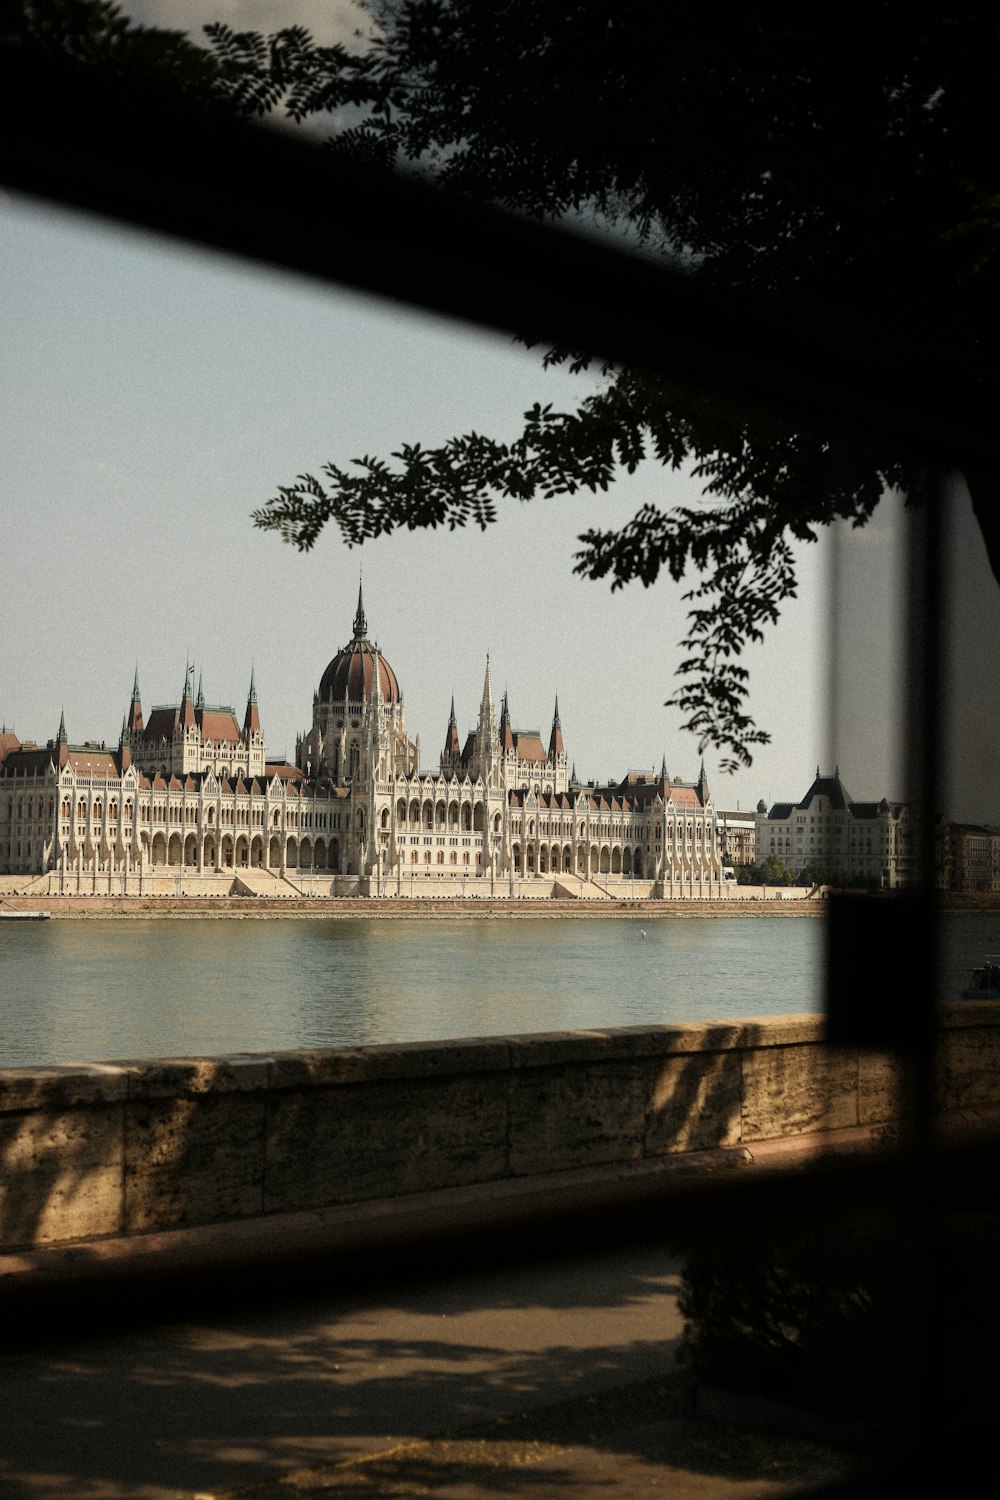 a view of a large building from across a river